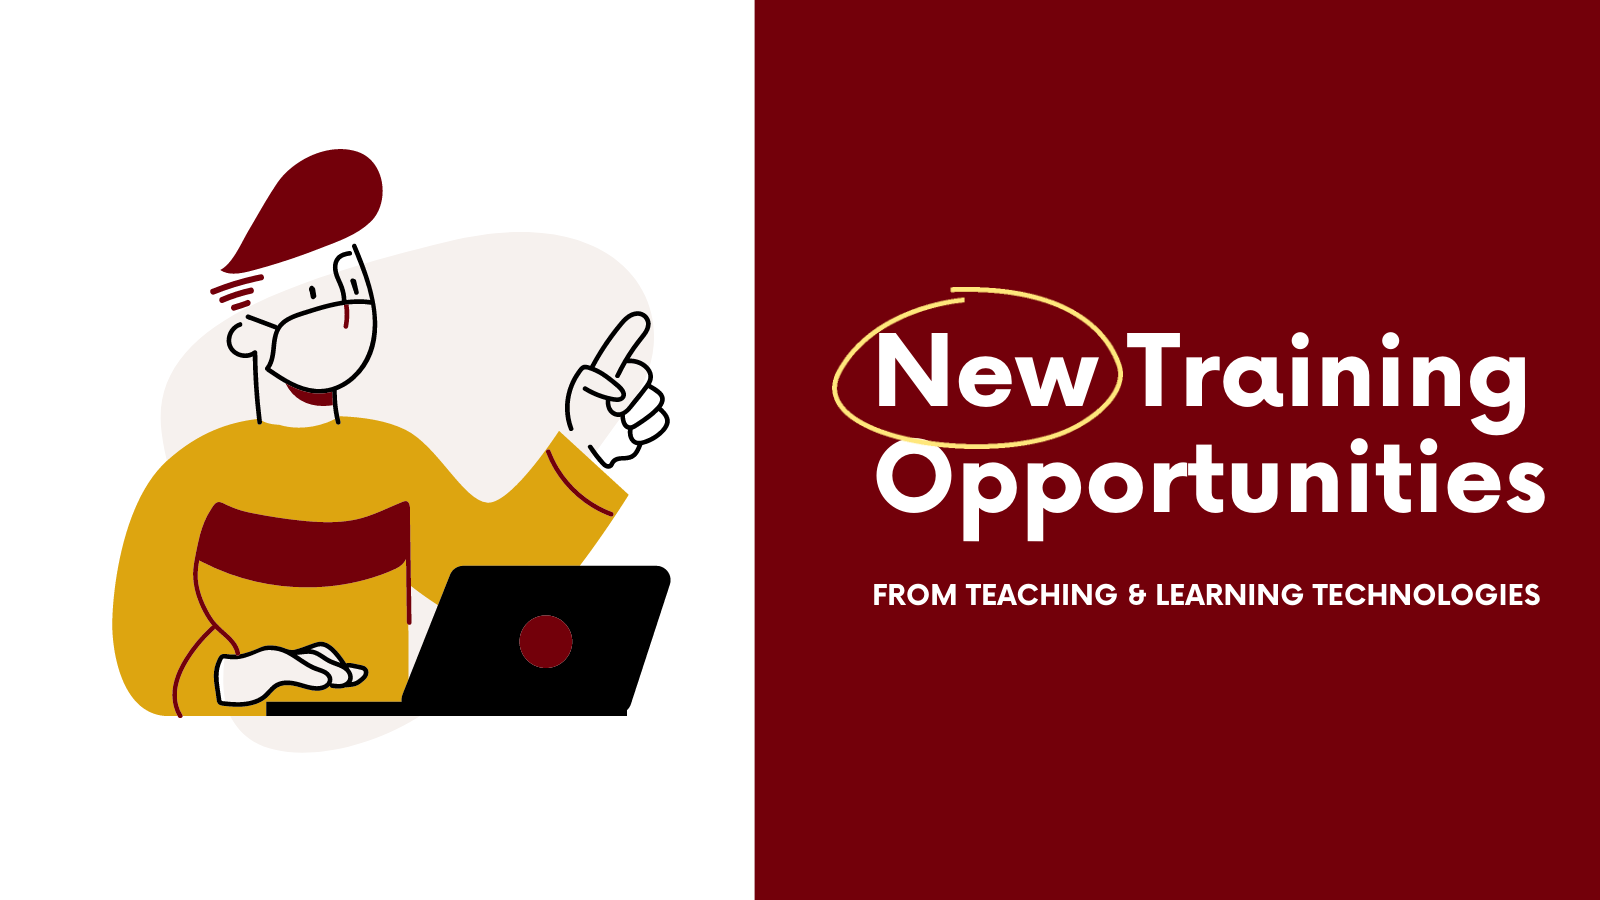 New Training Opportunities from Teaching & Learning Technologies